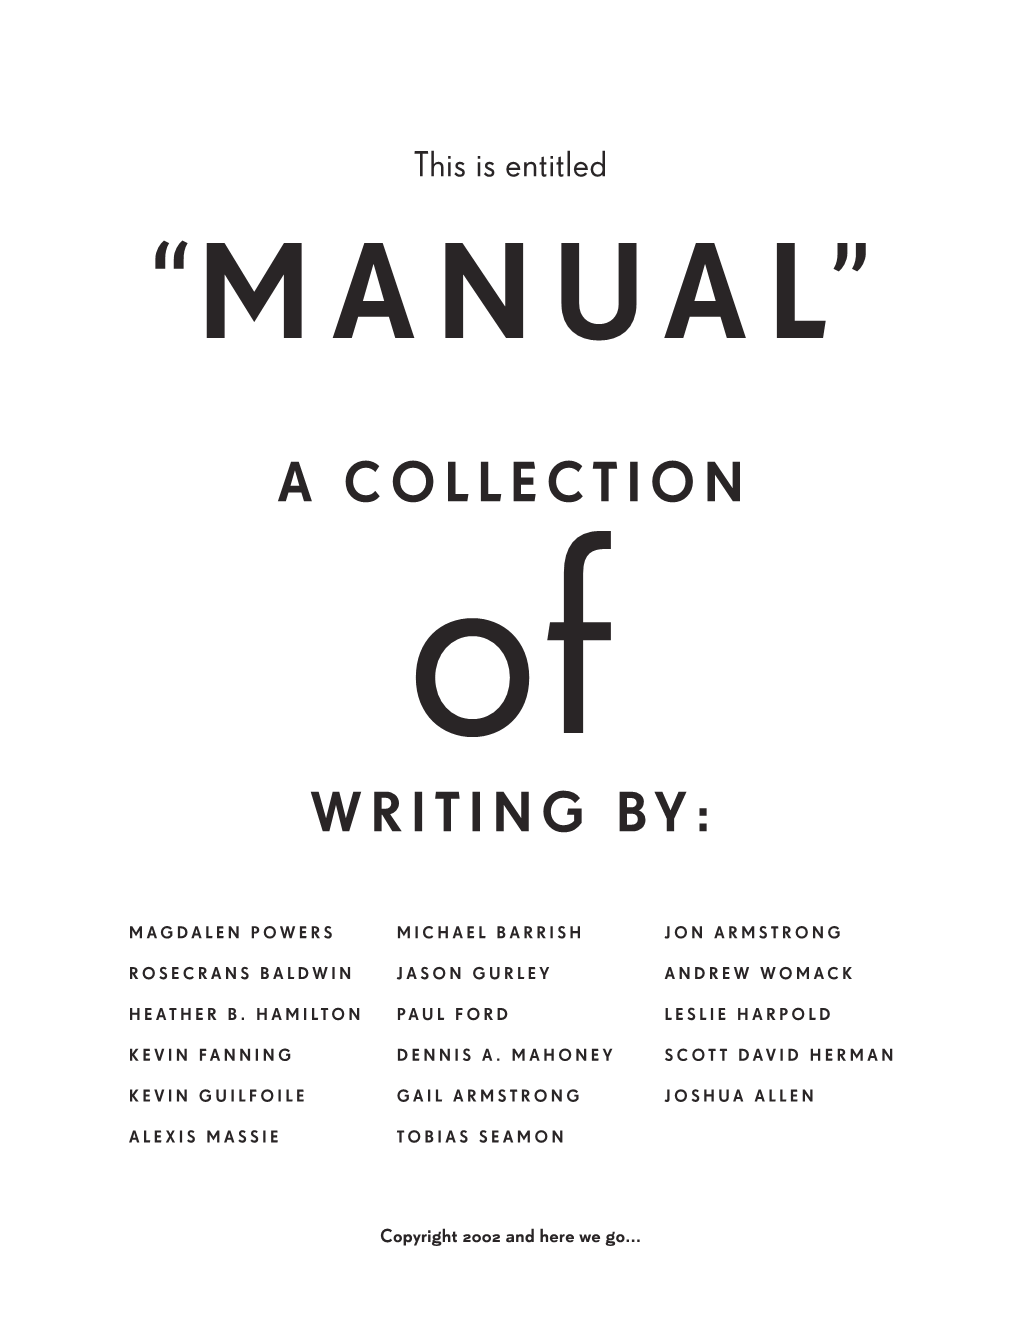 A Collection Writing